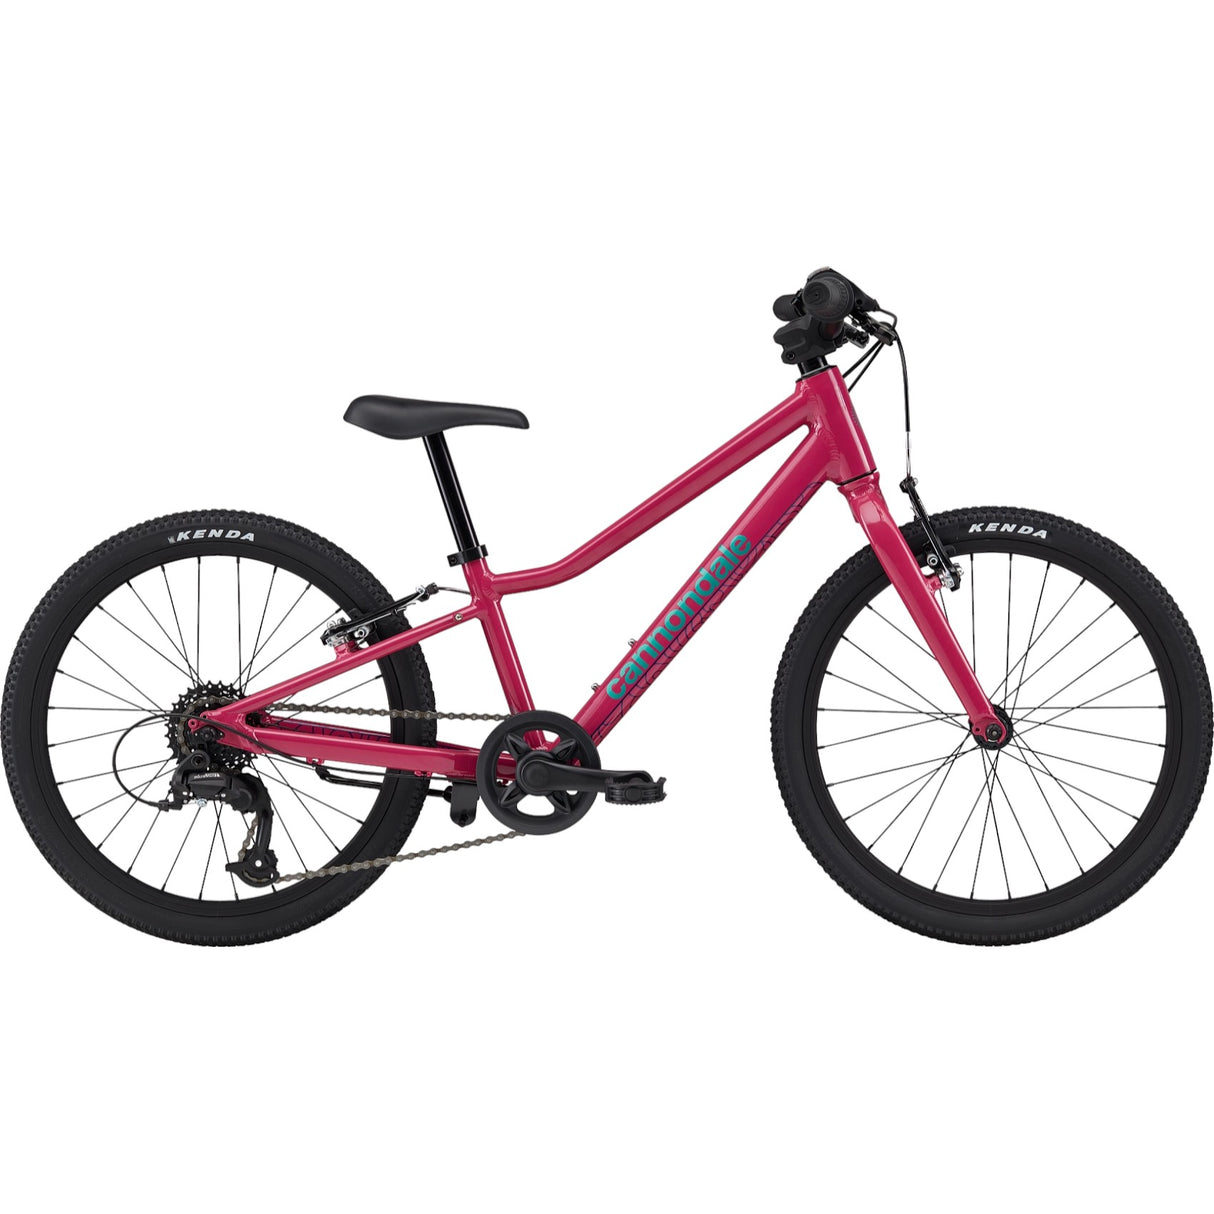 Cannondale Kids Quick 20 | Strictly Bicycles